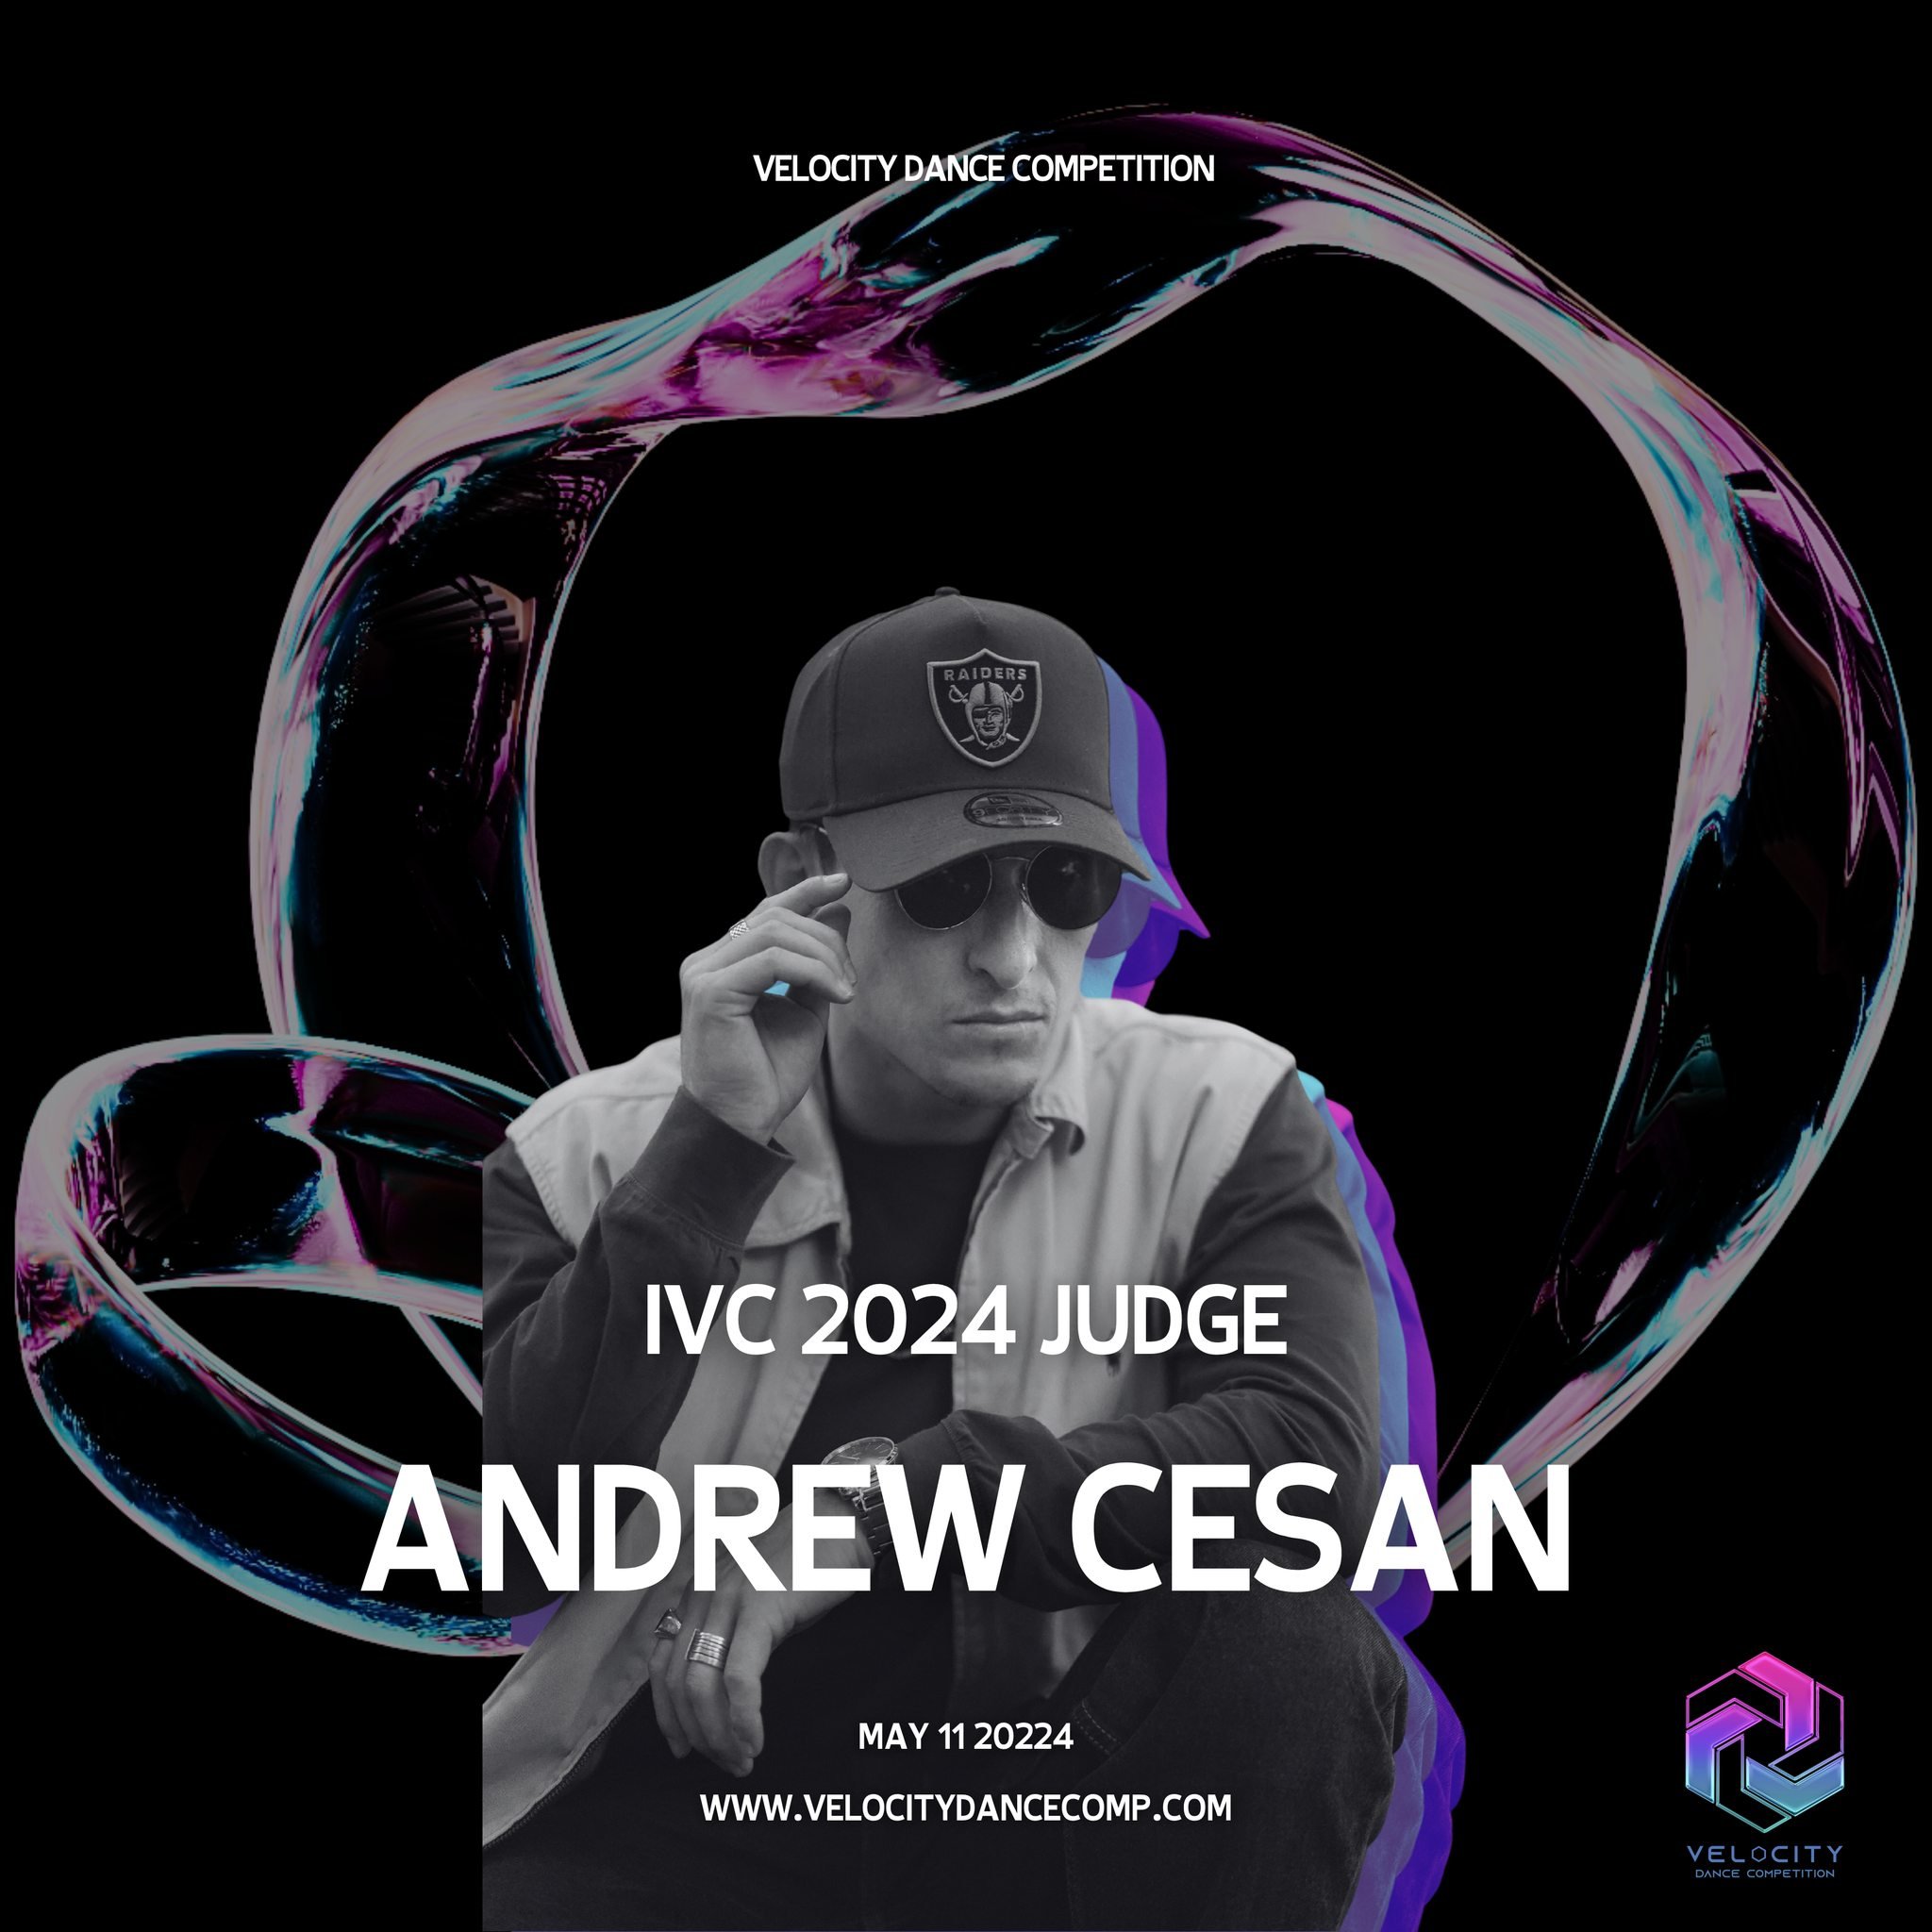 Announcing the INVERCARGILL JUDGE for 2024! We are super excited to have the amazing Andrew Cesan step into the judge's seat next weekend!

Andrew is the Director of Momentum Productions, based in Auckland. He is a choreographer, dancer and music pro